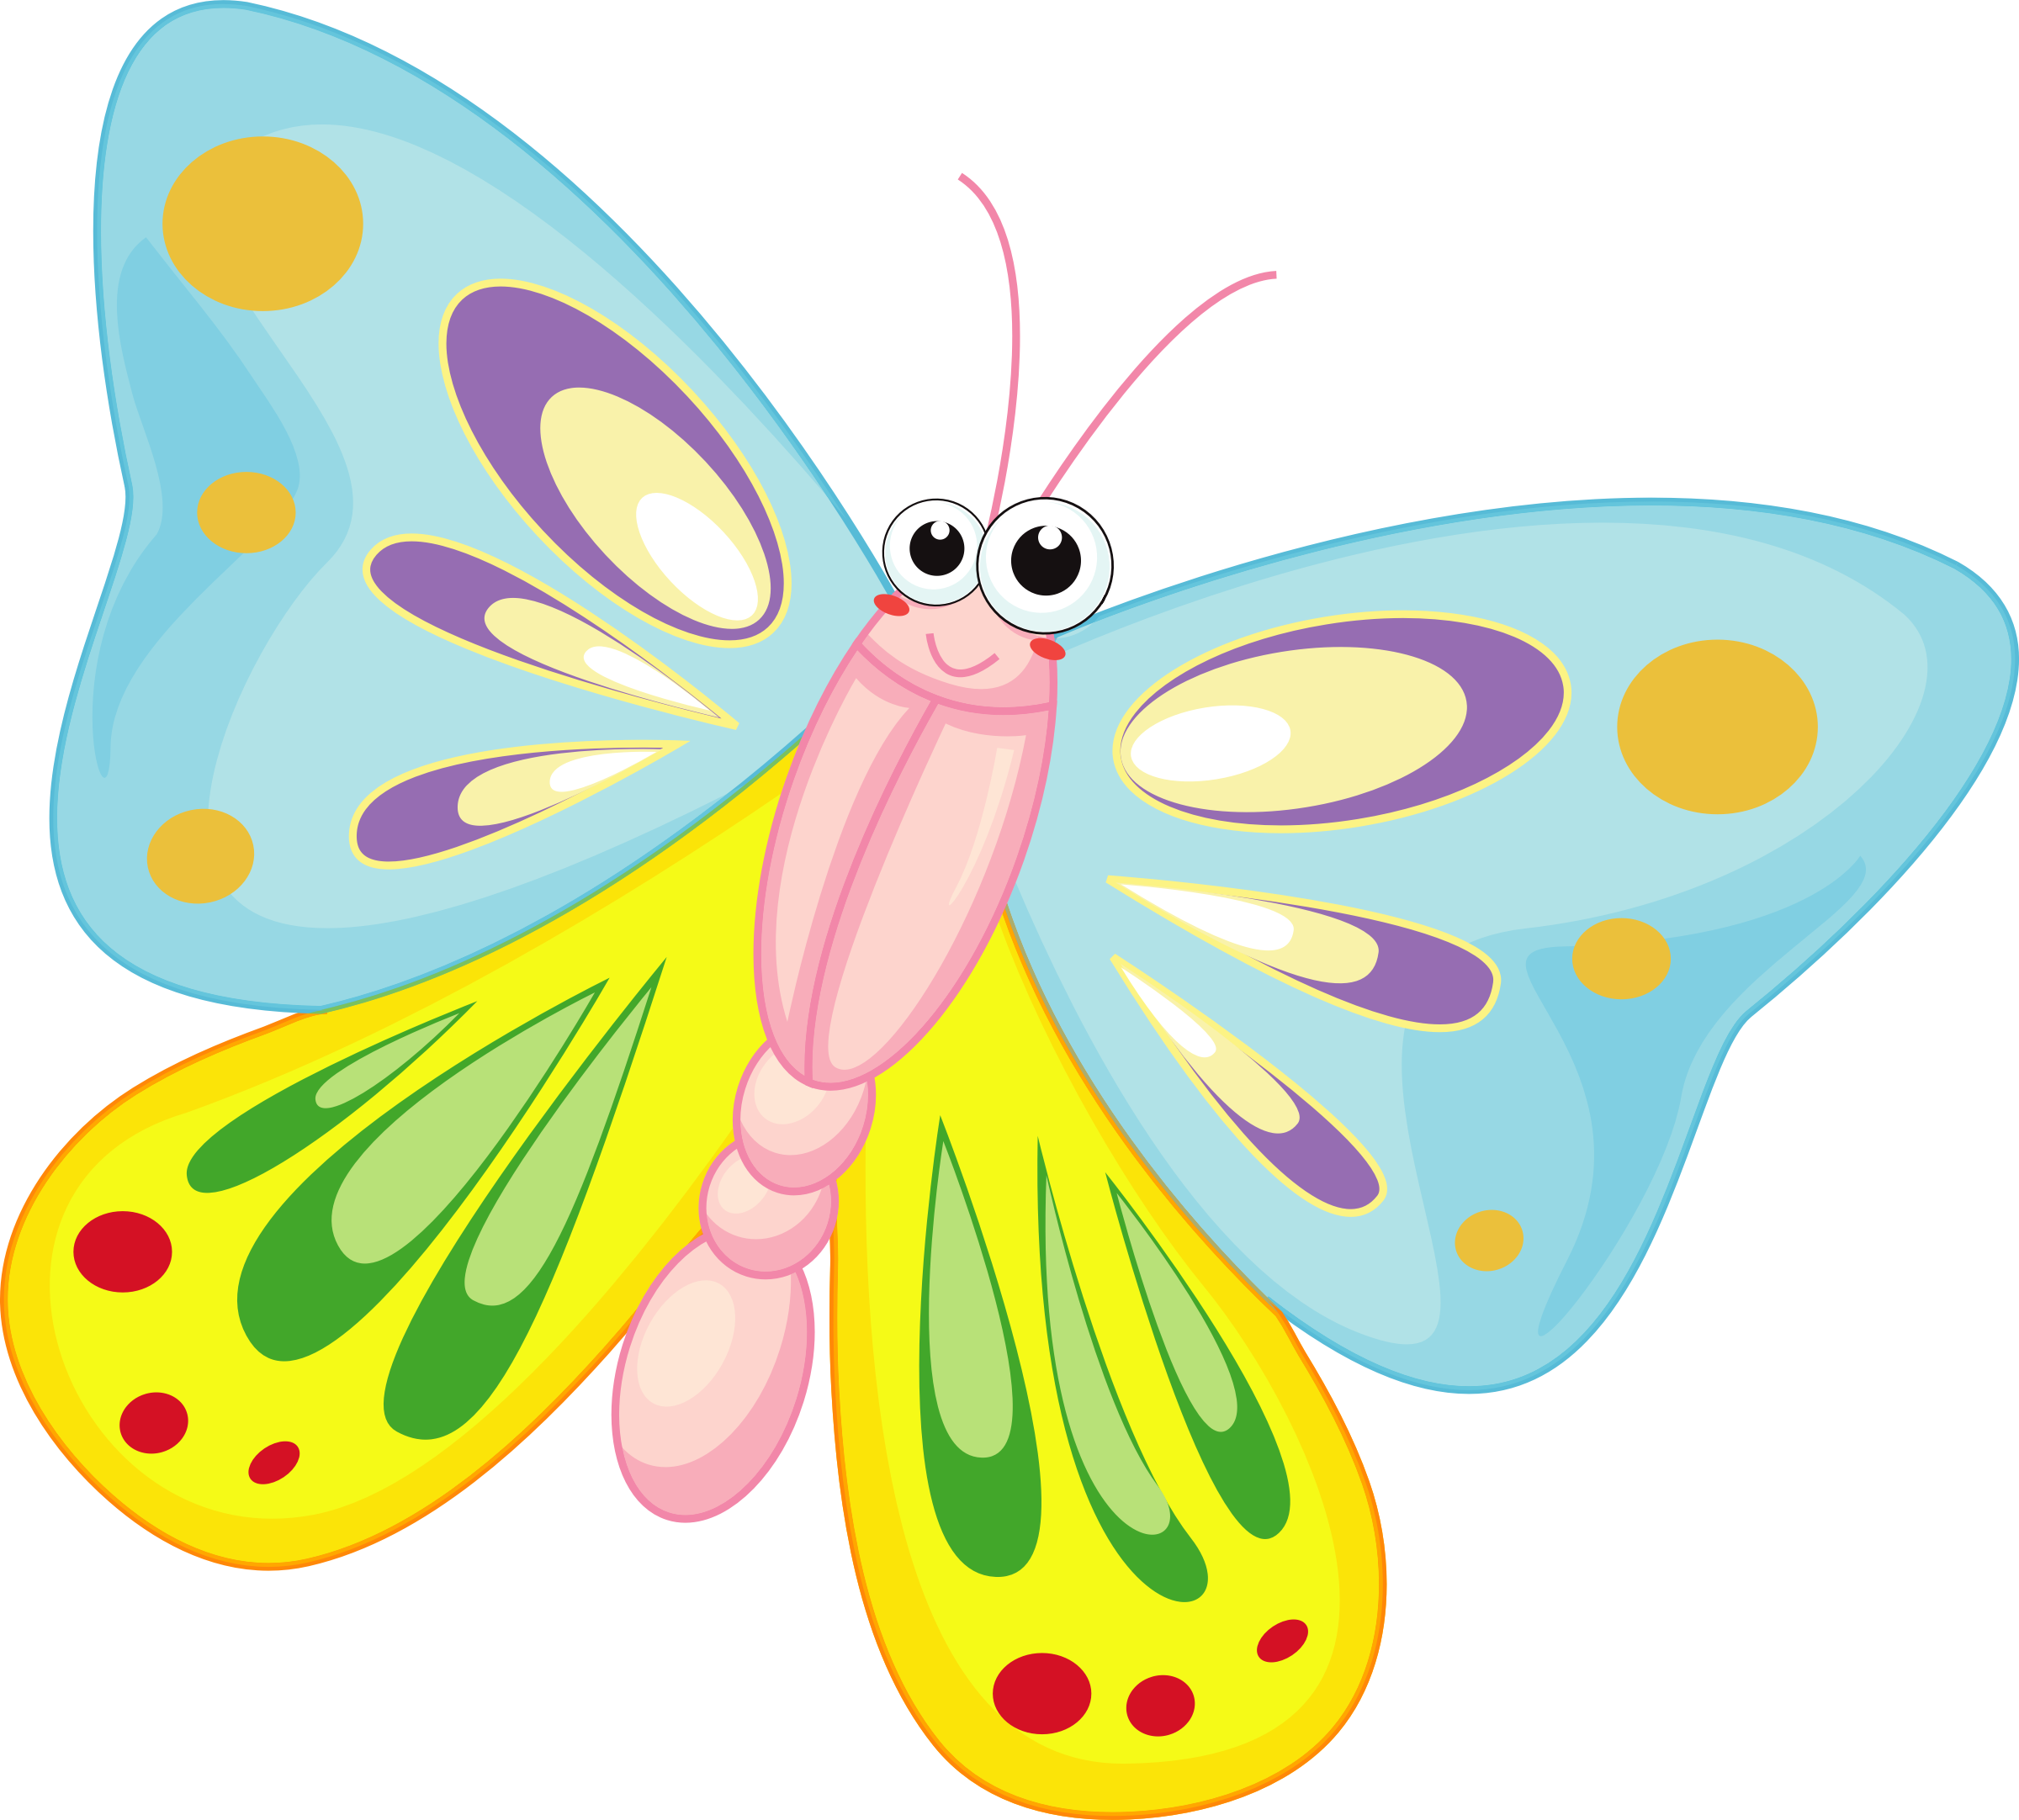 Download Butterfly Vector Art image - Free stock photo - Public ...